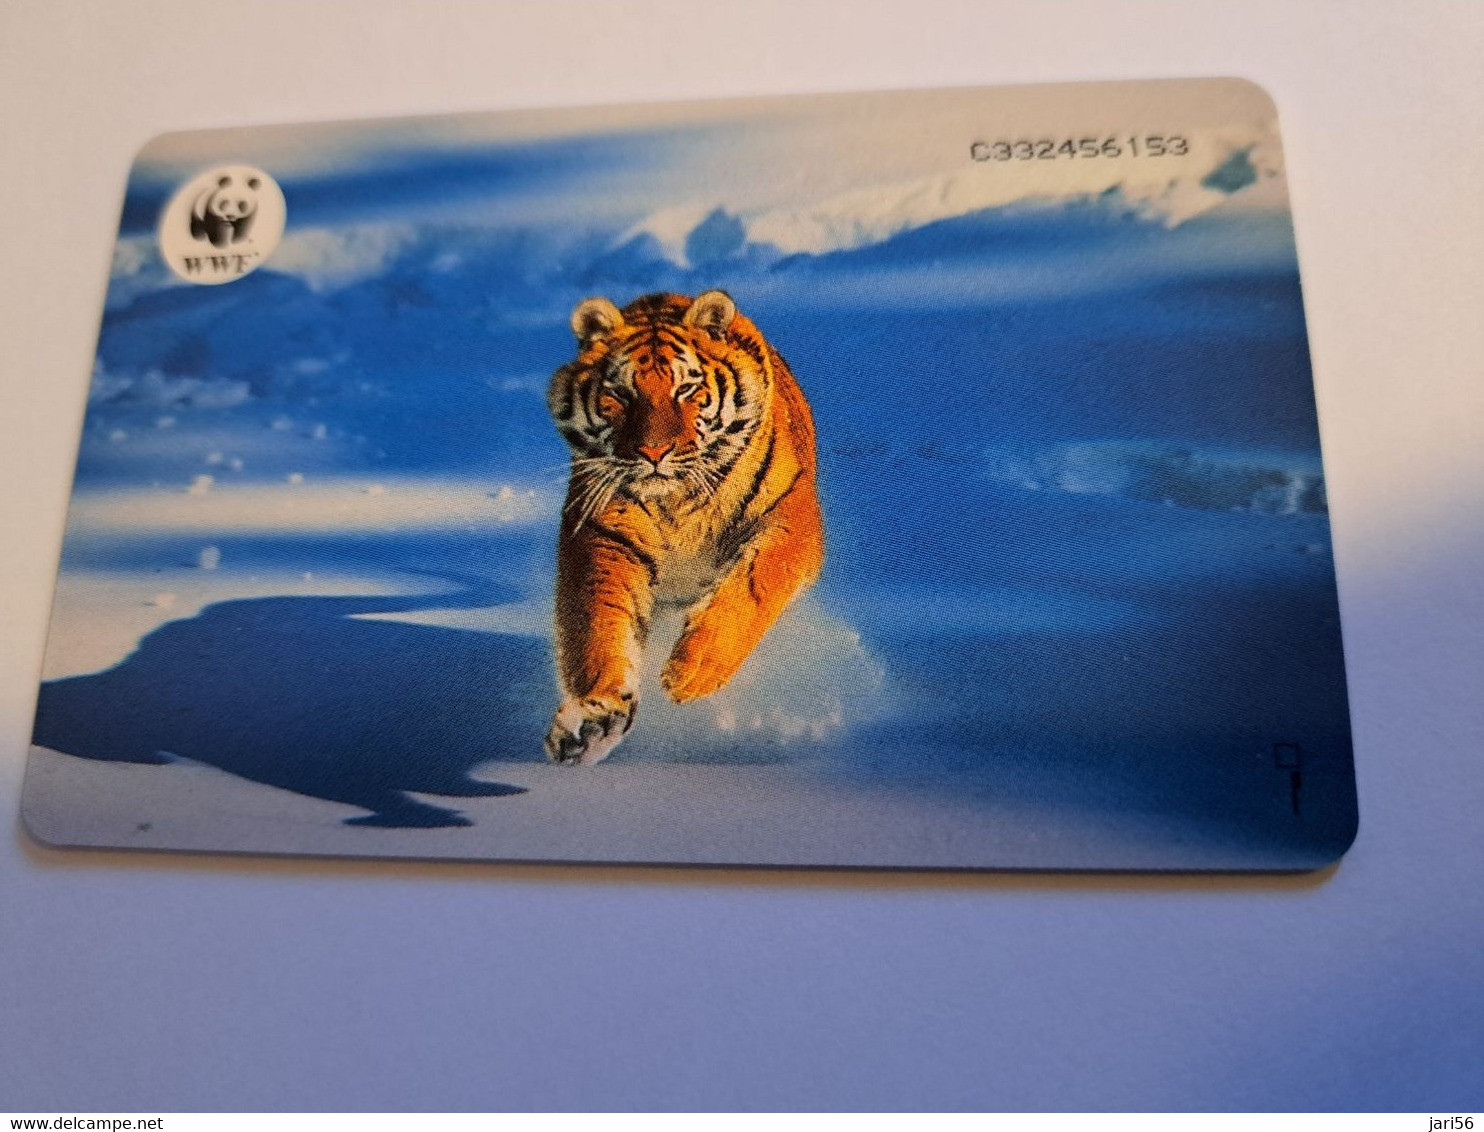 NETHERLANDS / WWF/WNF 1x TIGER/TIGRE  / CHIP ADVERTISING /DIFFICULT /  HFL 2,50 /CRD 531.01  MINT !!  ** 11987** - Privat